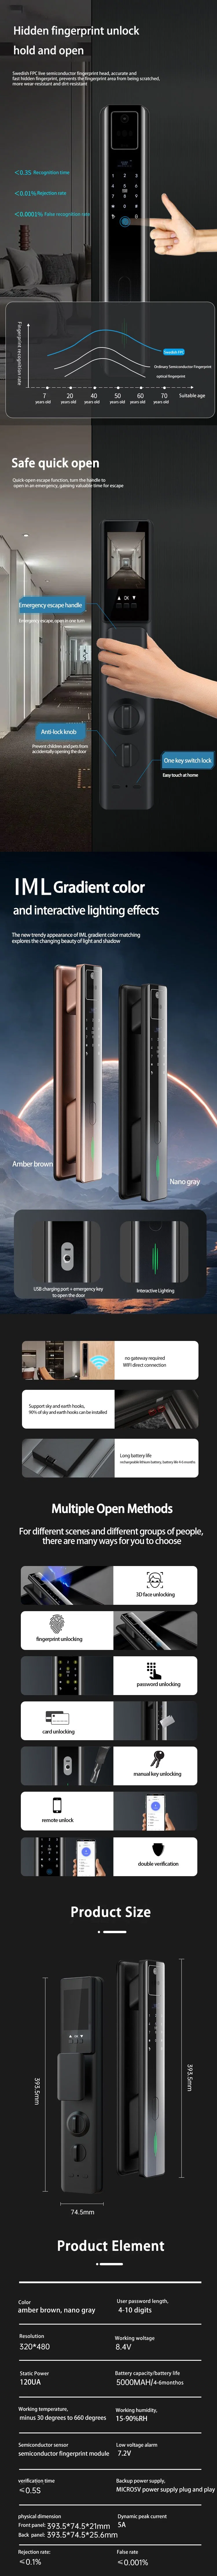 Home Automation Keypad Residential Digital 3D Visual Cat-Eye Face Identification Fingerprint Door Lock From Chinese Manufacturers